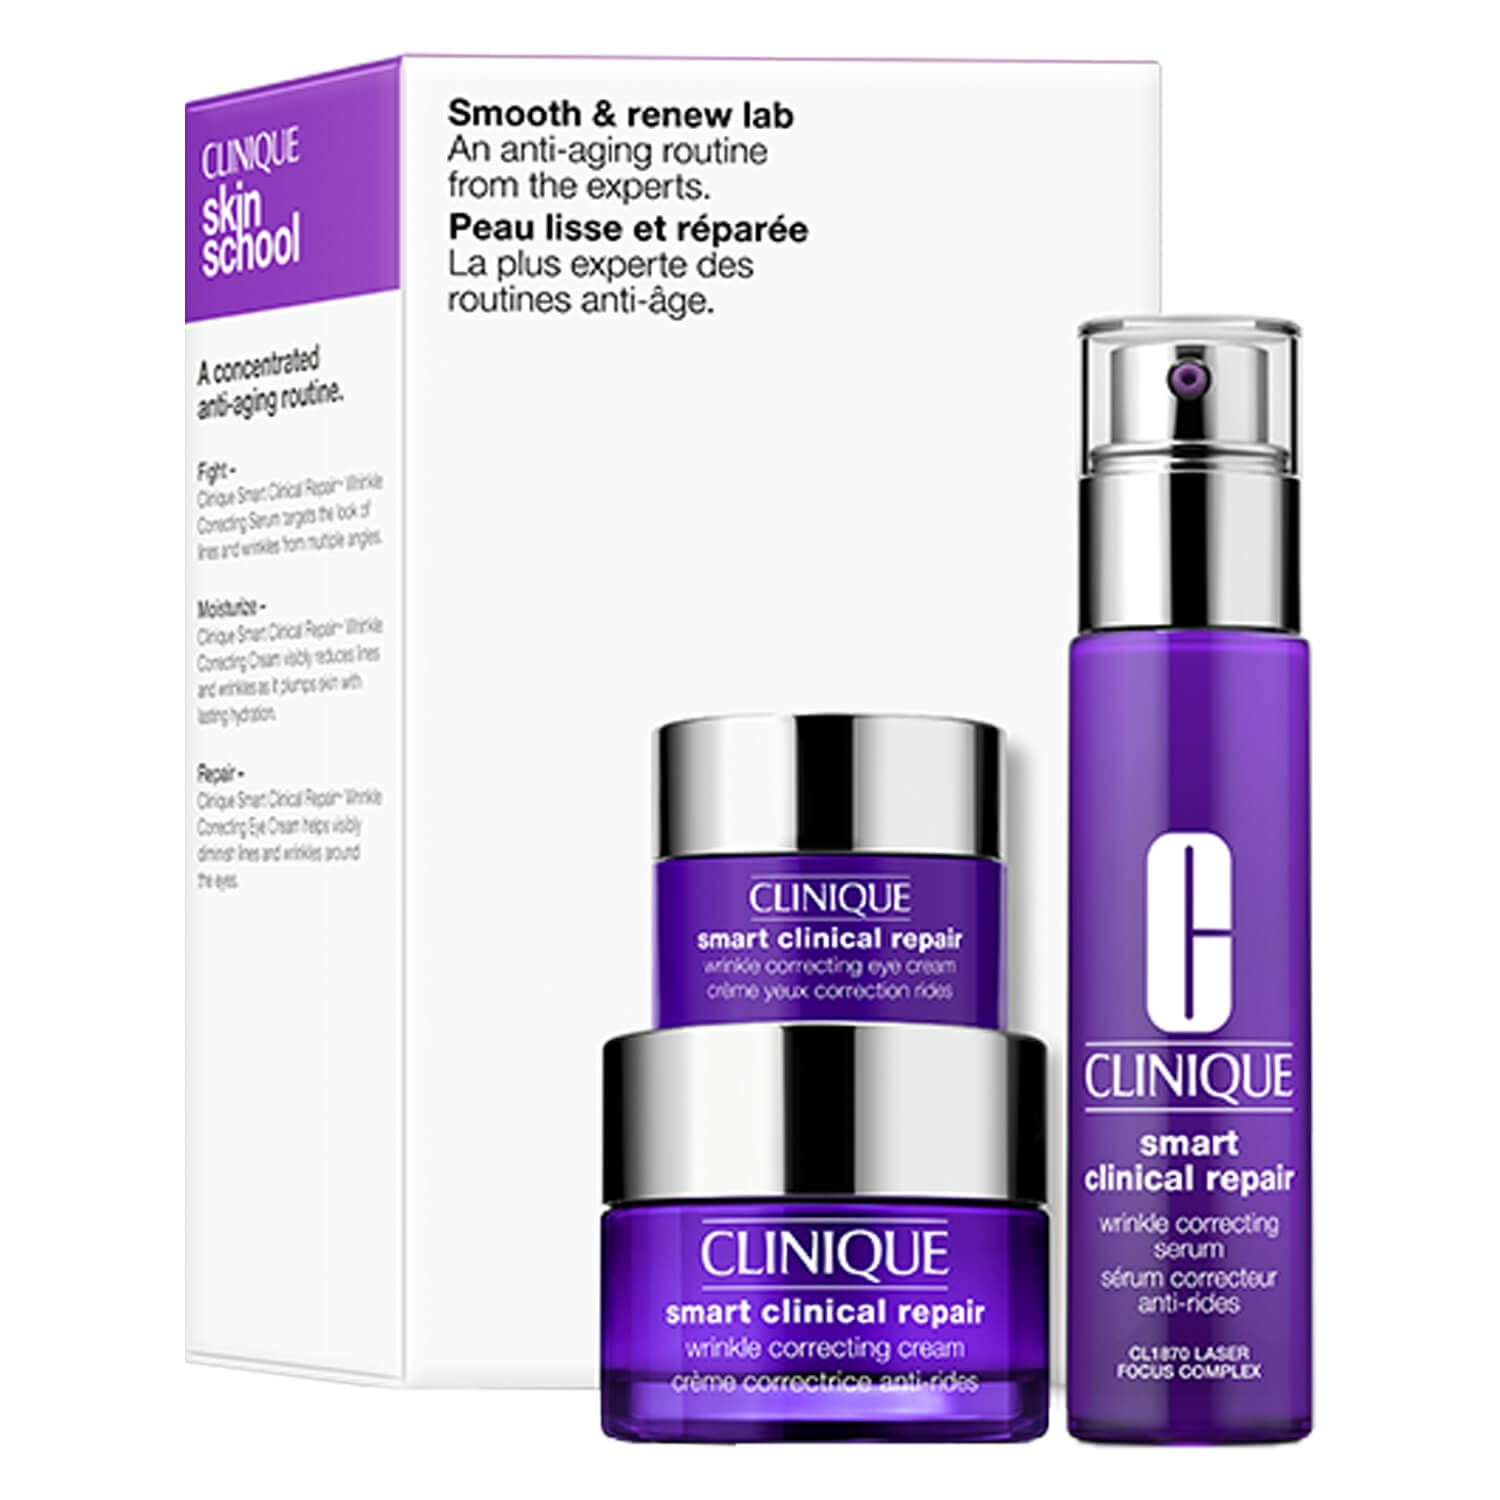 Product image from Clinique Set - Smooth & renew lab Kit